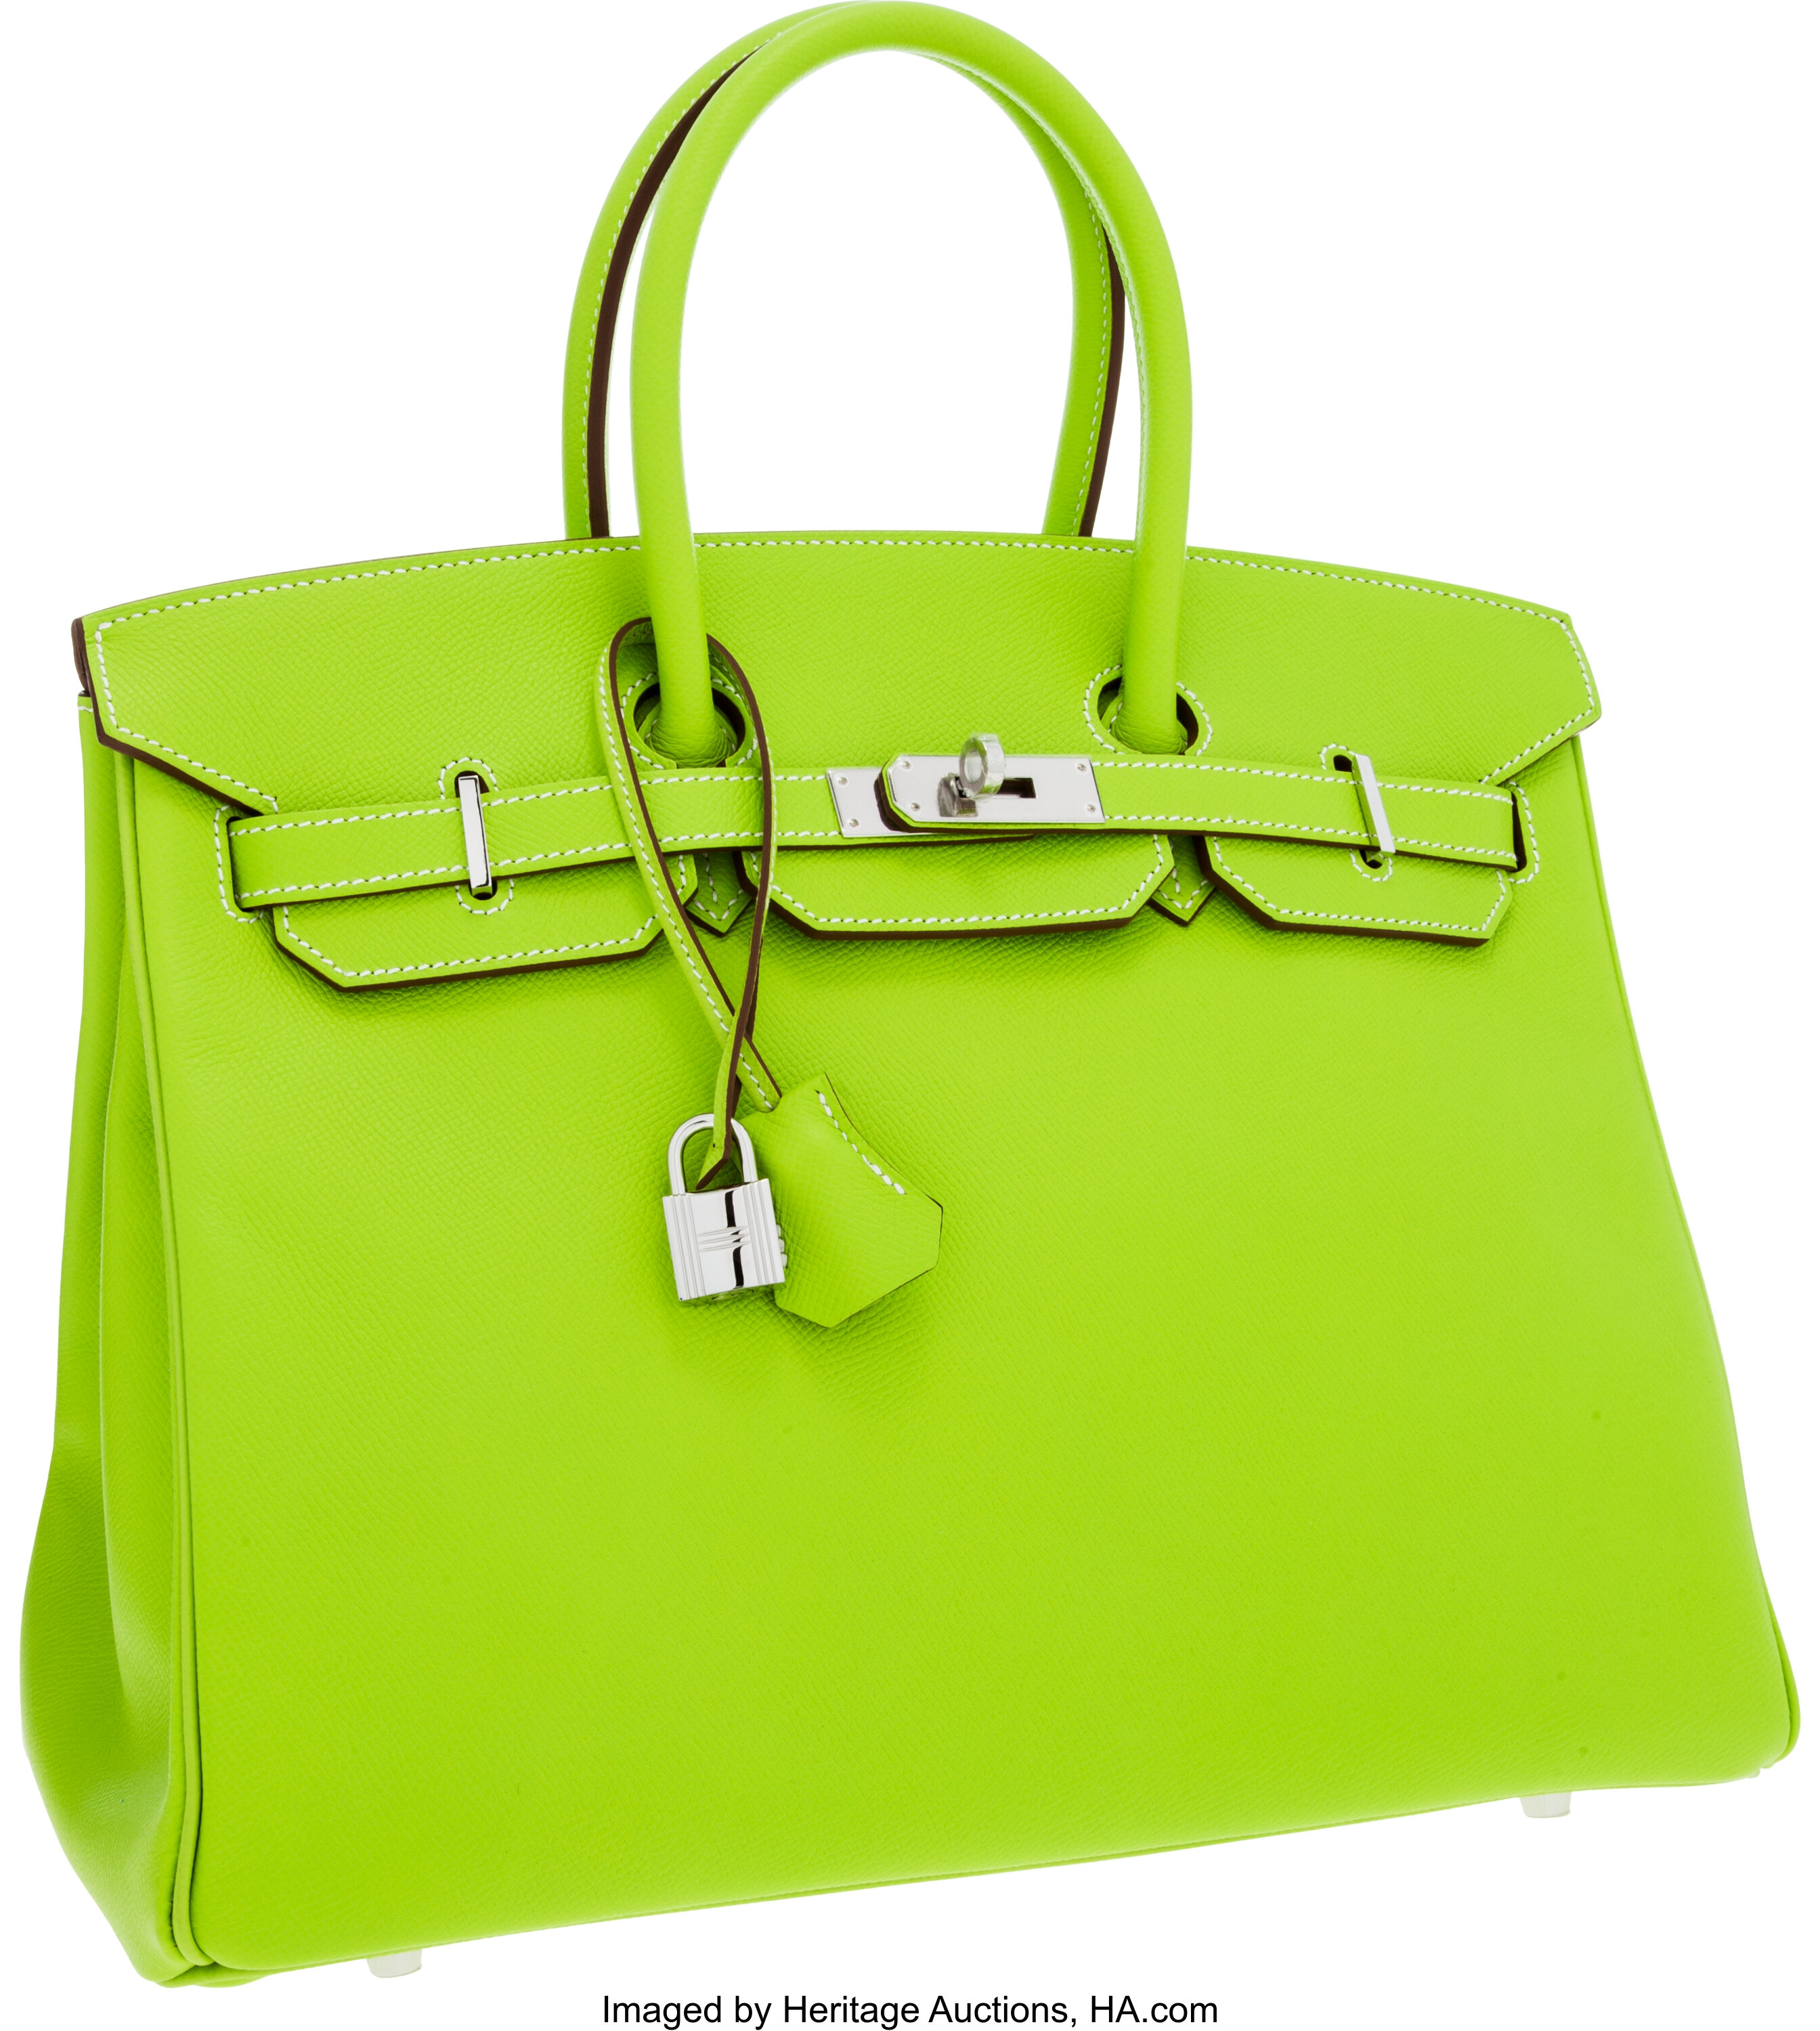 Hermès Candy Collection: Limited Edition Birkin and Kelly Bags